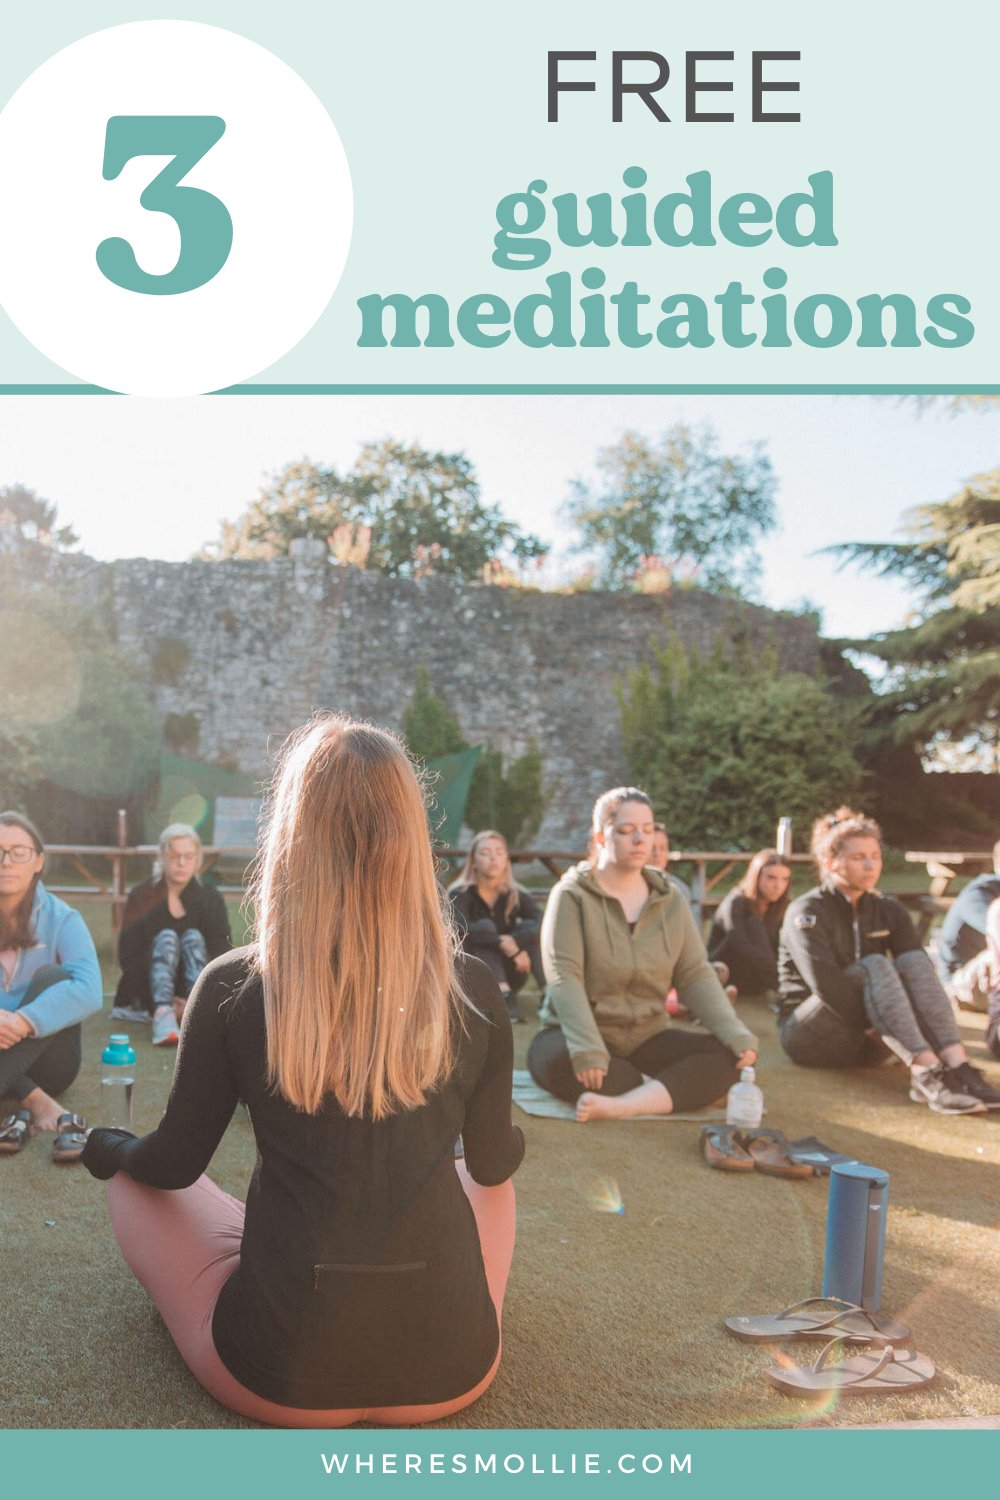 A meditation guide for beginners